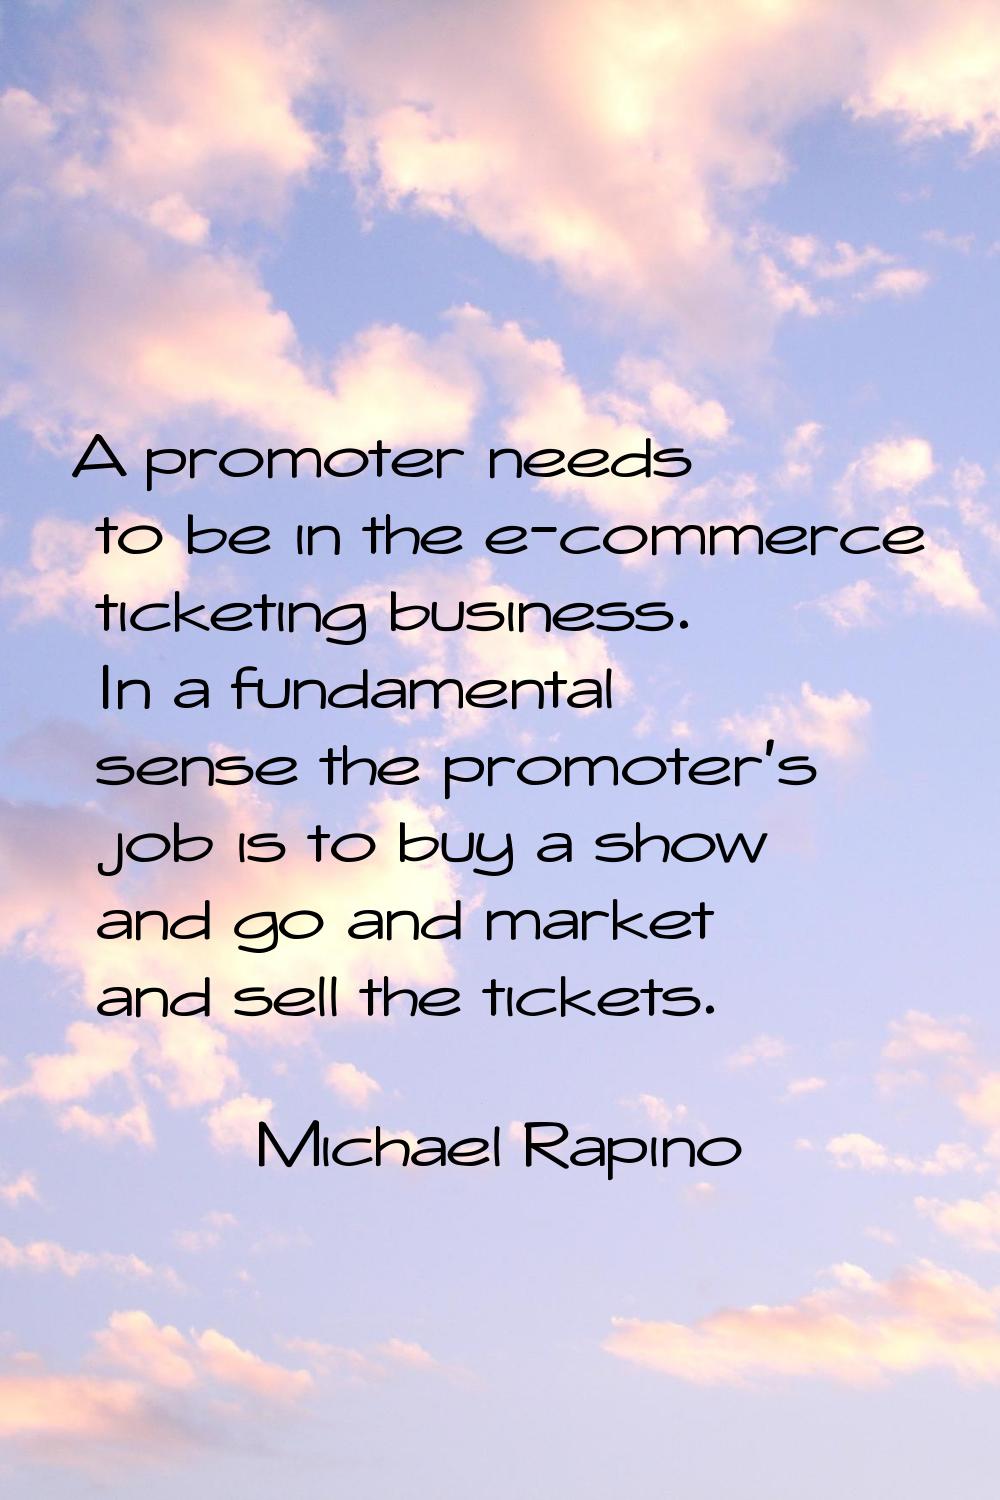 A promoter needs to be in the e-commerce ticketing business. In a fundamental sense the promoter's 